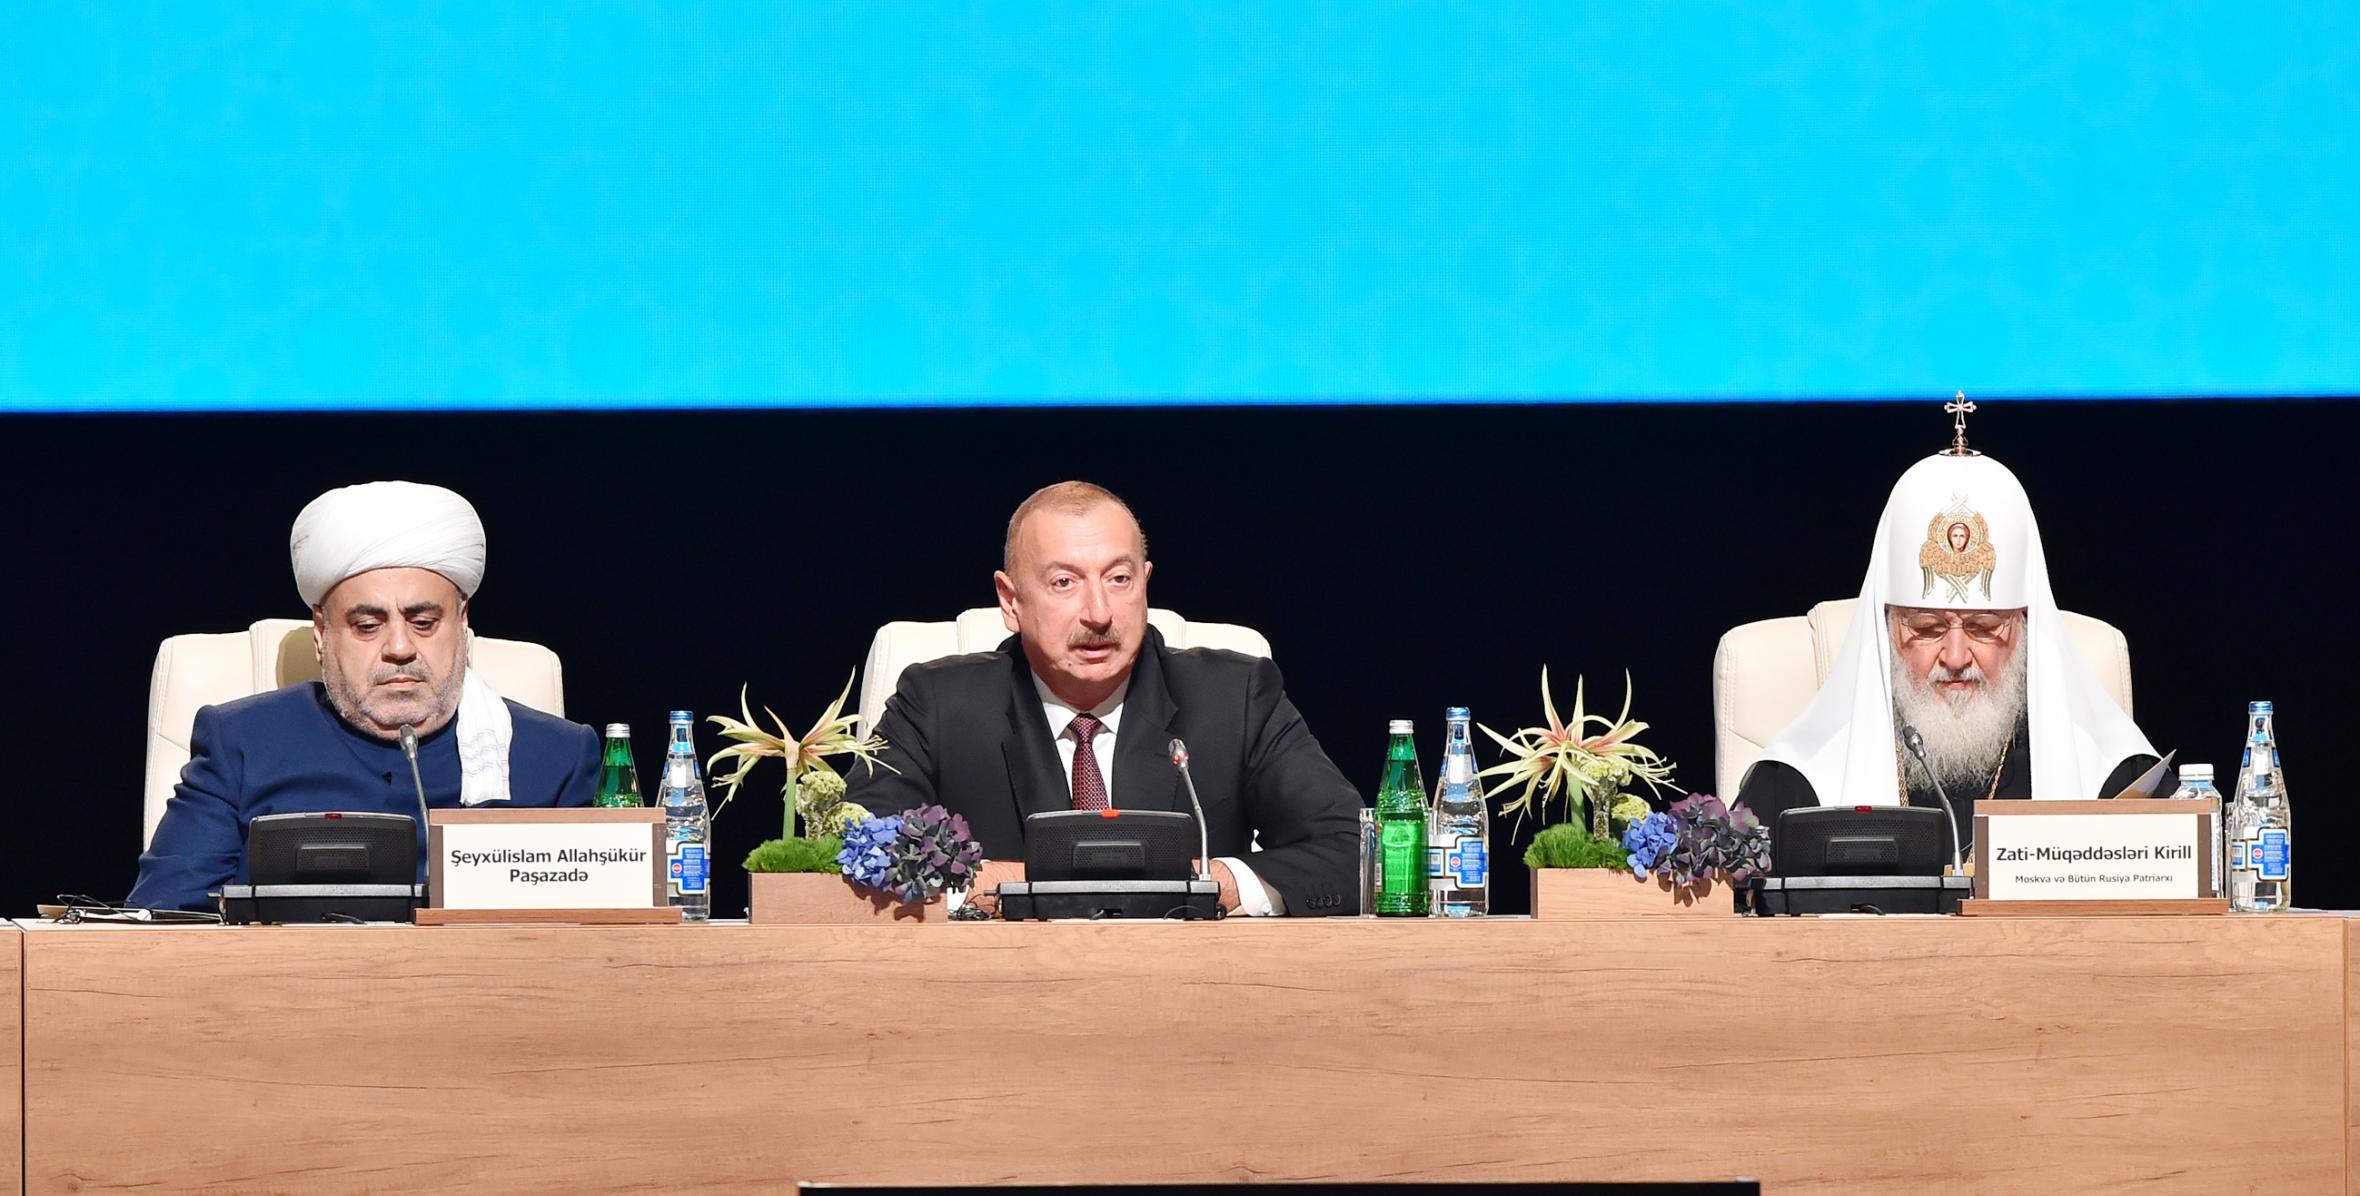 Speech by Ilham Aliyev at the 2nd Summit of World Religious Leaders gets underway in Baku